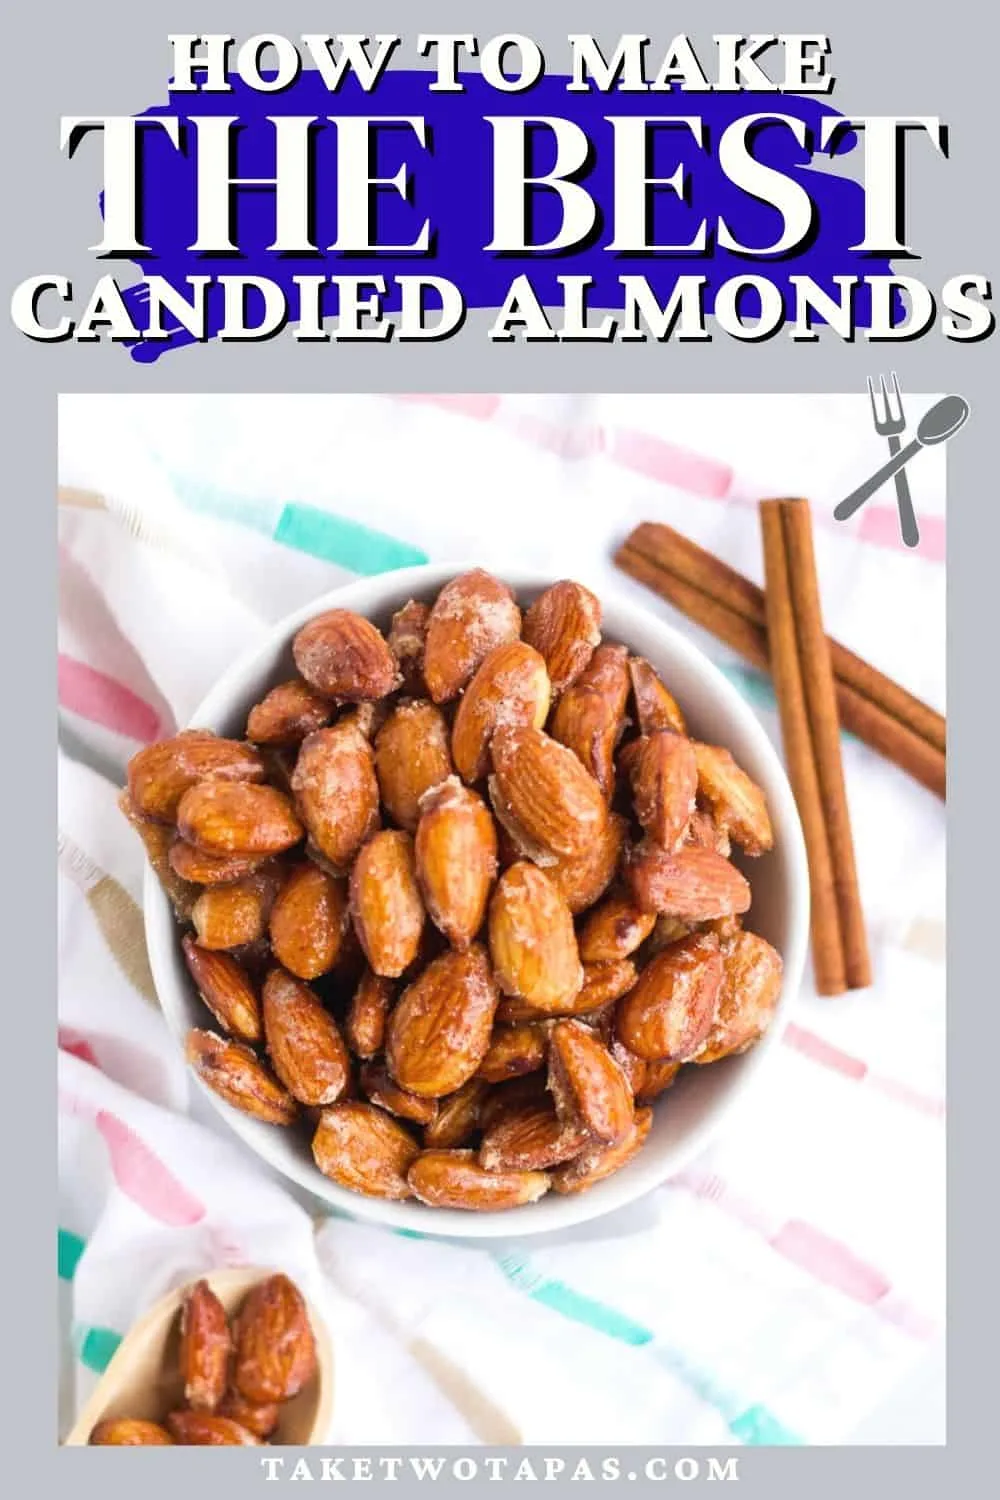 almonds with text "how to make the best candied almonds"